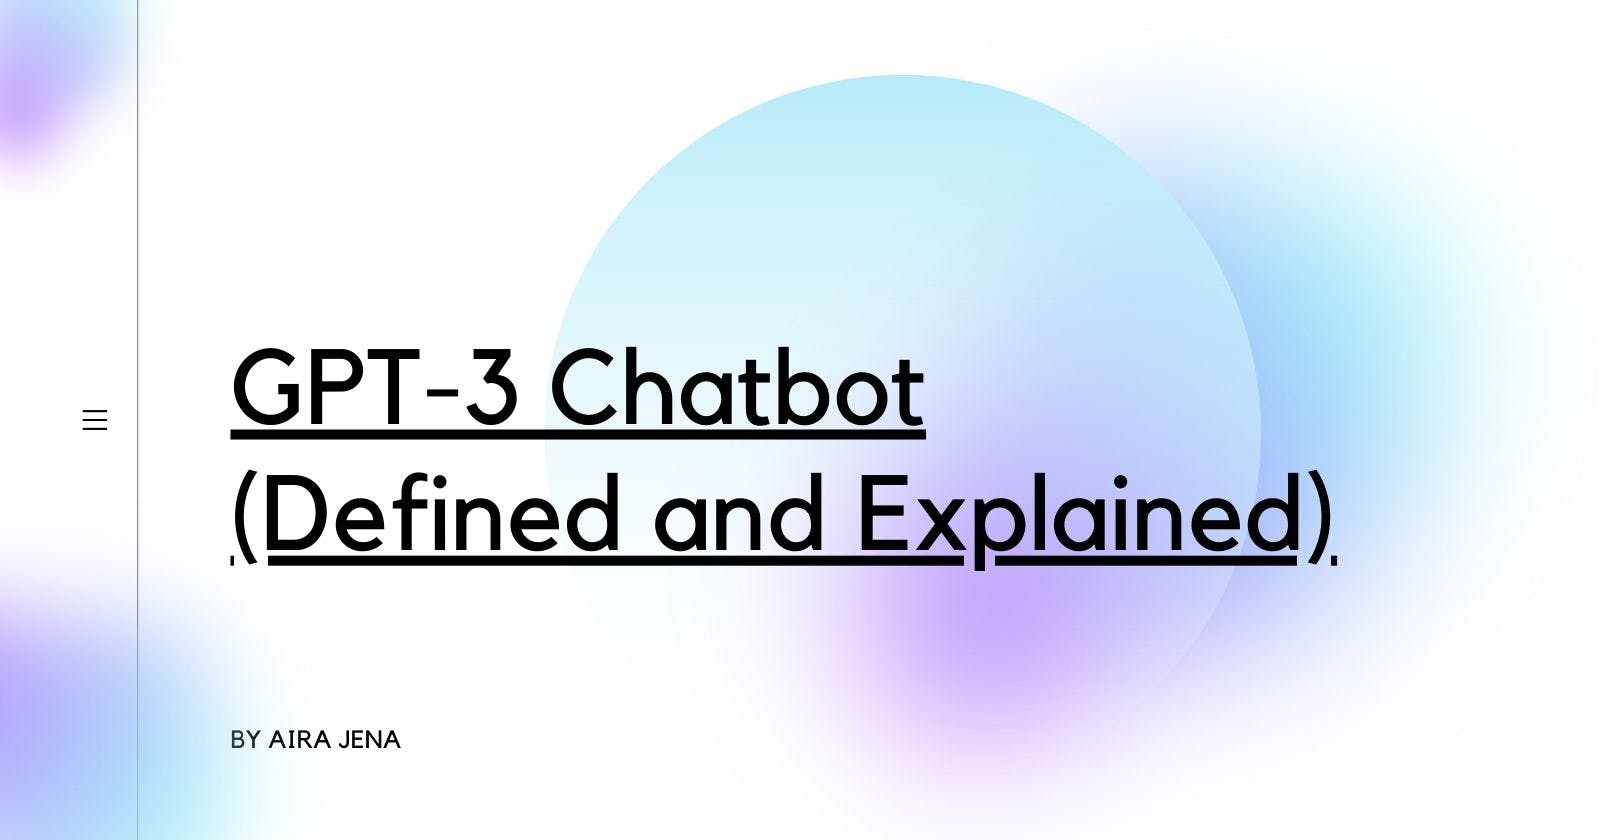 GPT-3 Chatbot (Defined and Explained)